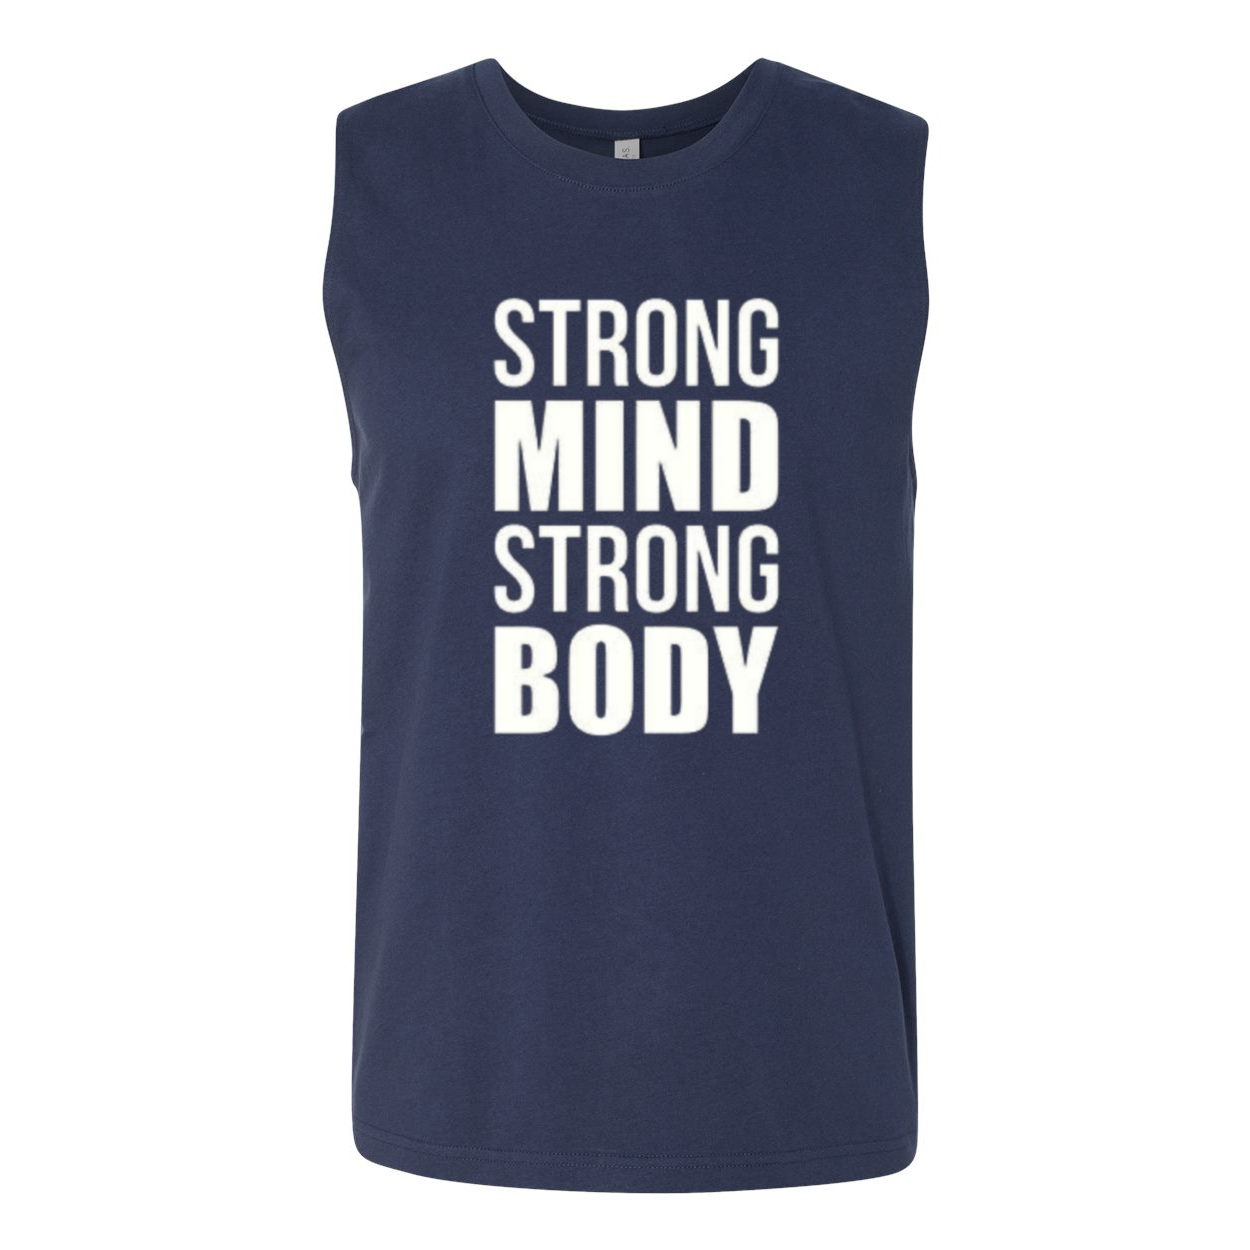 YOLO FITTED STRONG MIND STRONG BODY MEN'S  MUSCLE TANK - Yolofitted